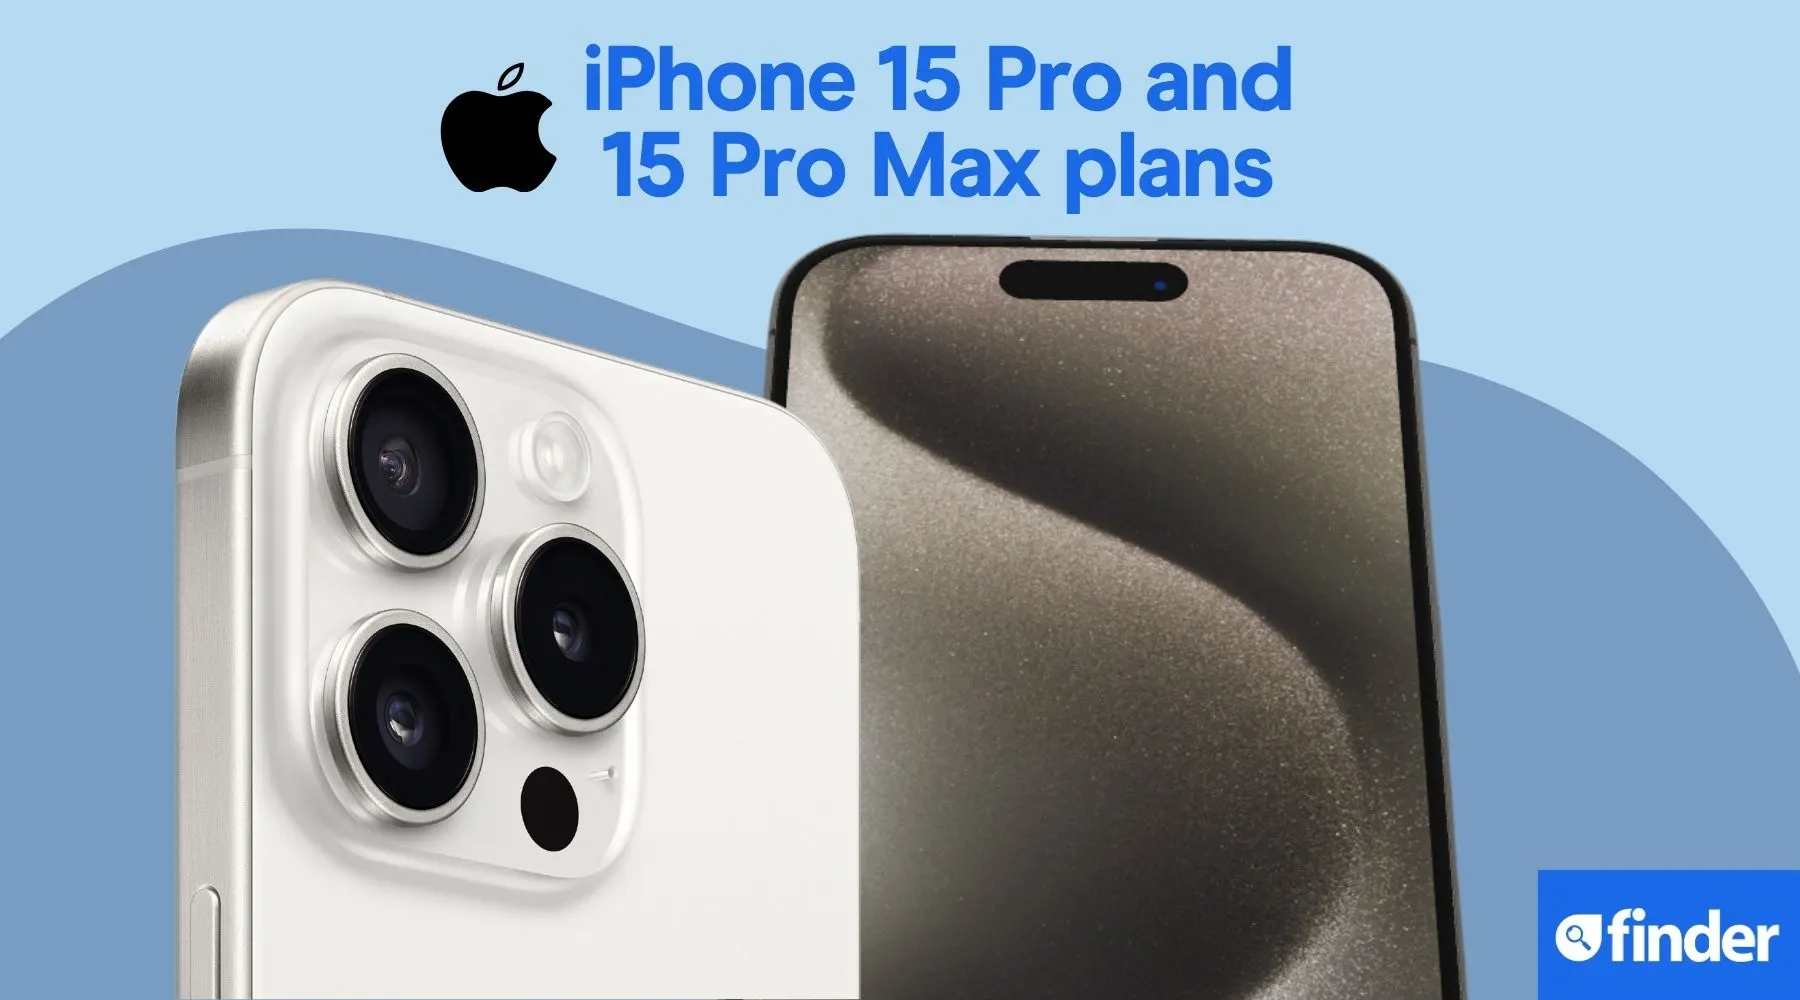 Best iPhone 15 Pro and 15 Pro Max plans in Australia